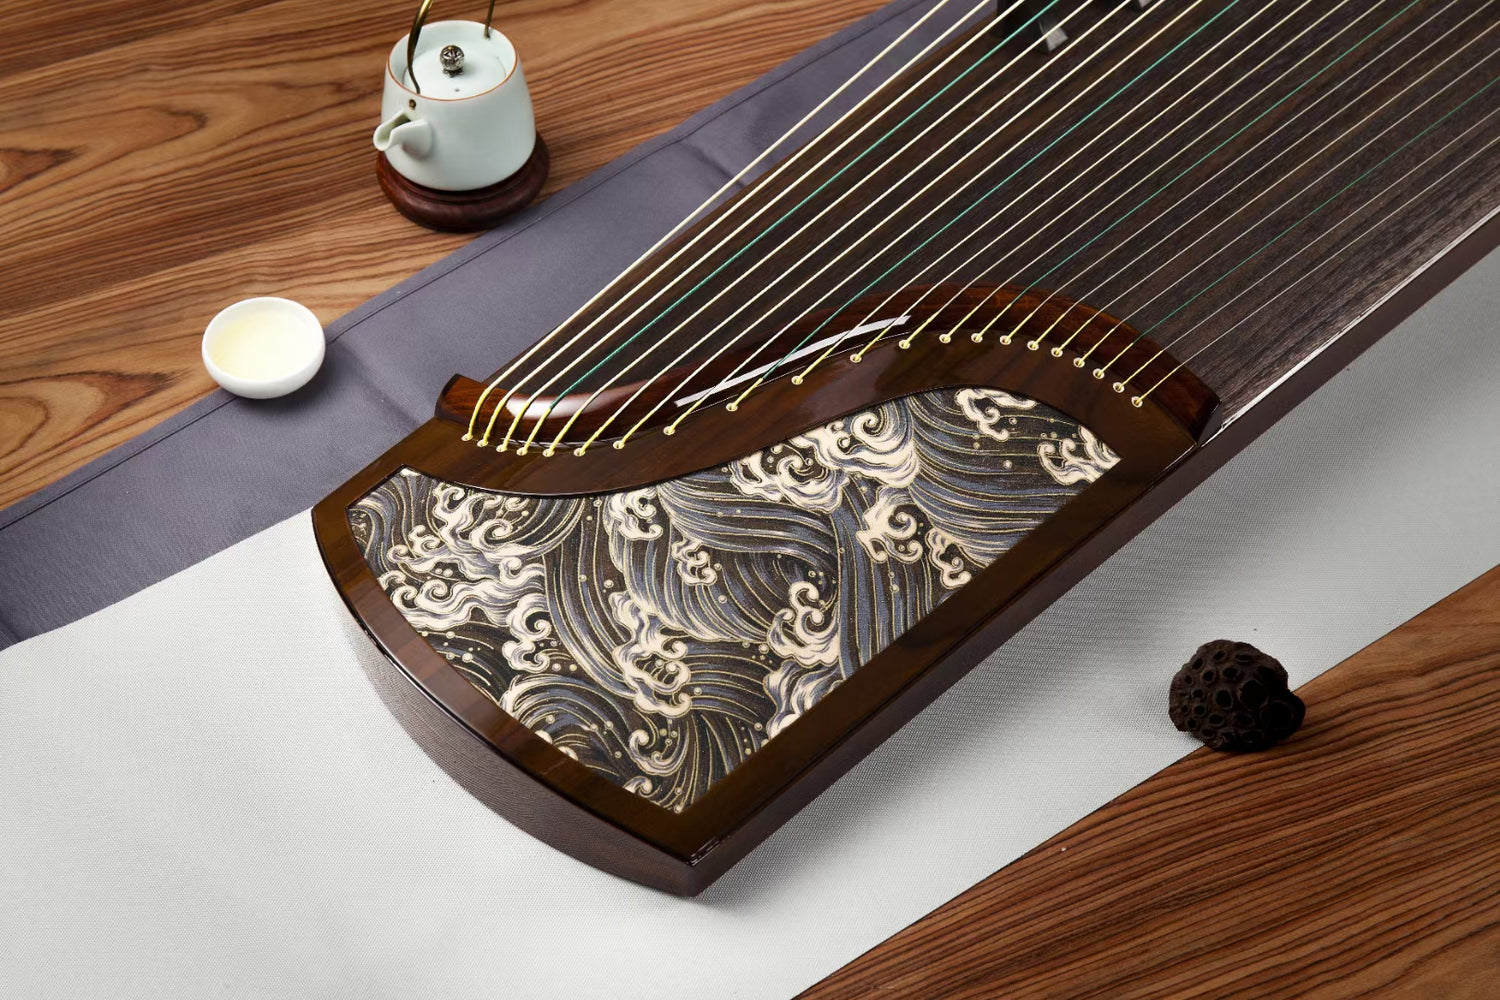  Specialist guzheng shop and authorised dealer for top guzheng brands such as Zhuque, Dongyun, Tangxiang, Hongyin, Haitang, Sobo, Yueling and many more. We deliver worldwide.  海外买高性价比古筝 - 敦煌，朱雀，泓音，海棠，三好，木曰，月灵，松柏